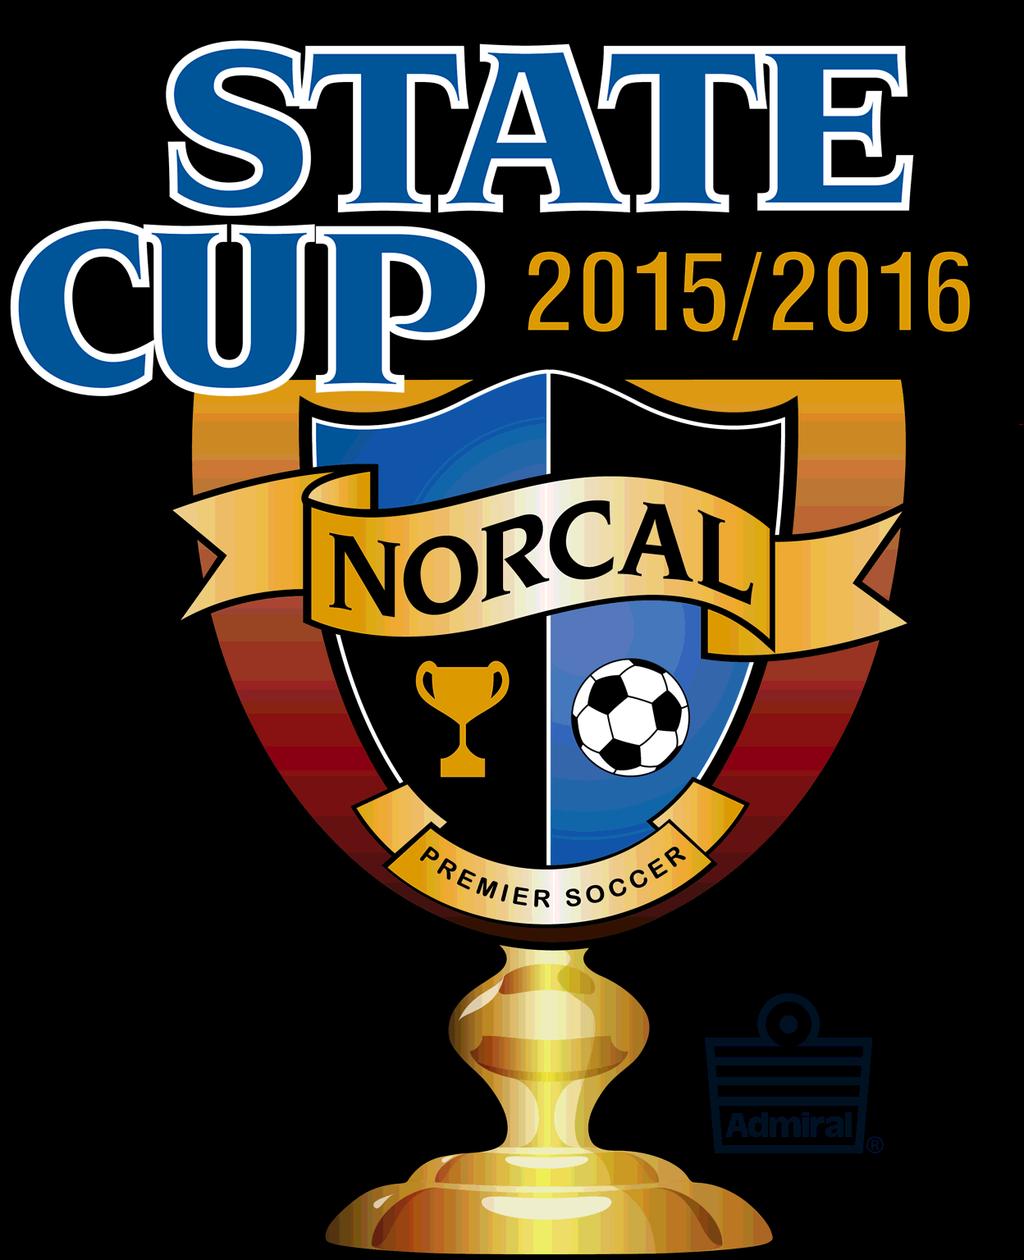 The NorCal State Cup Knockout Phase is the final round of the competition, consisting of the single elimination portion of the State Cup.